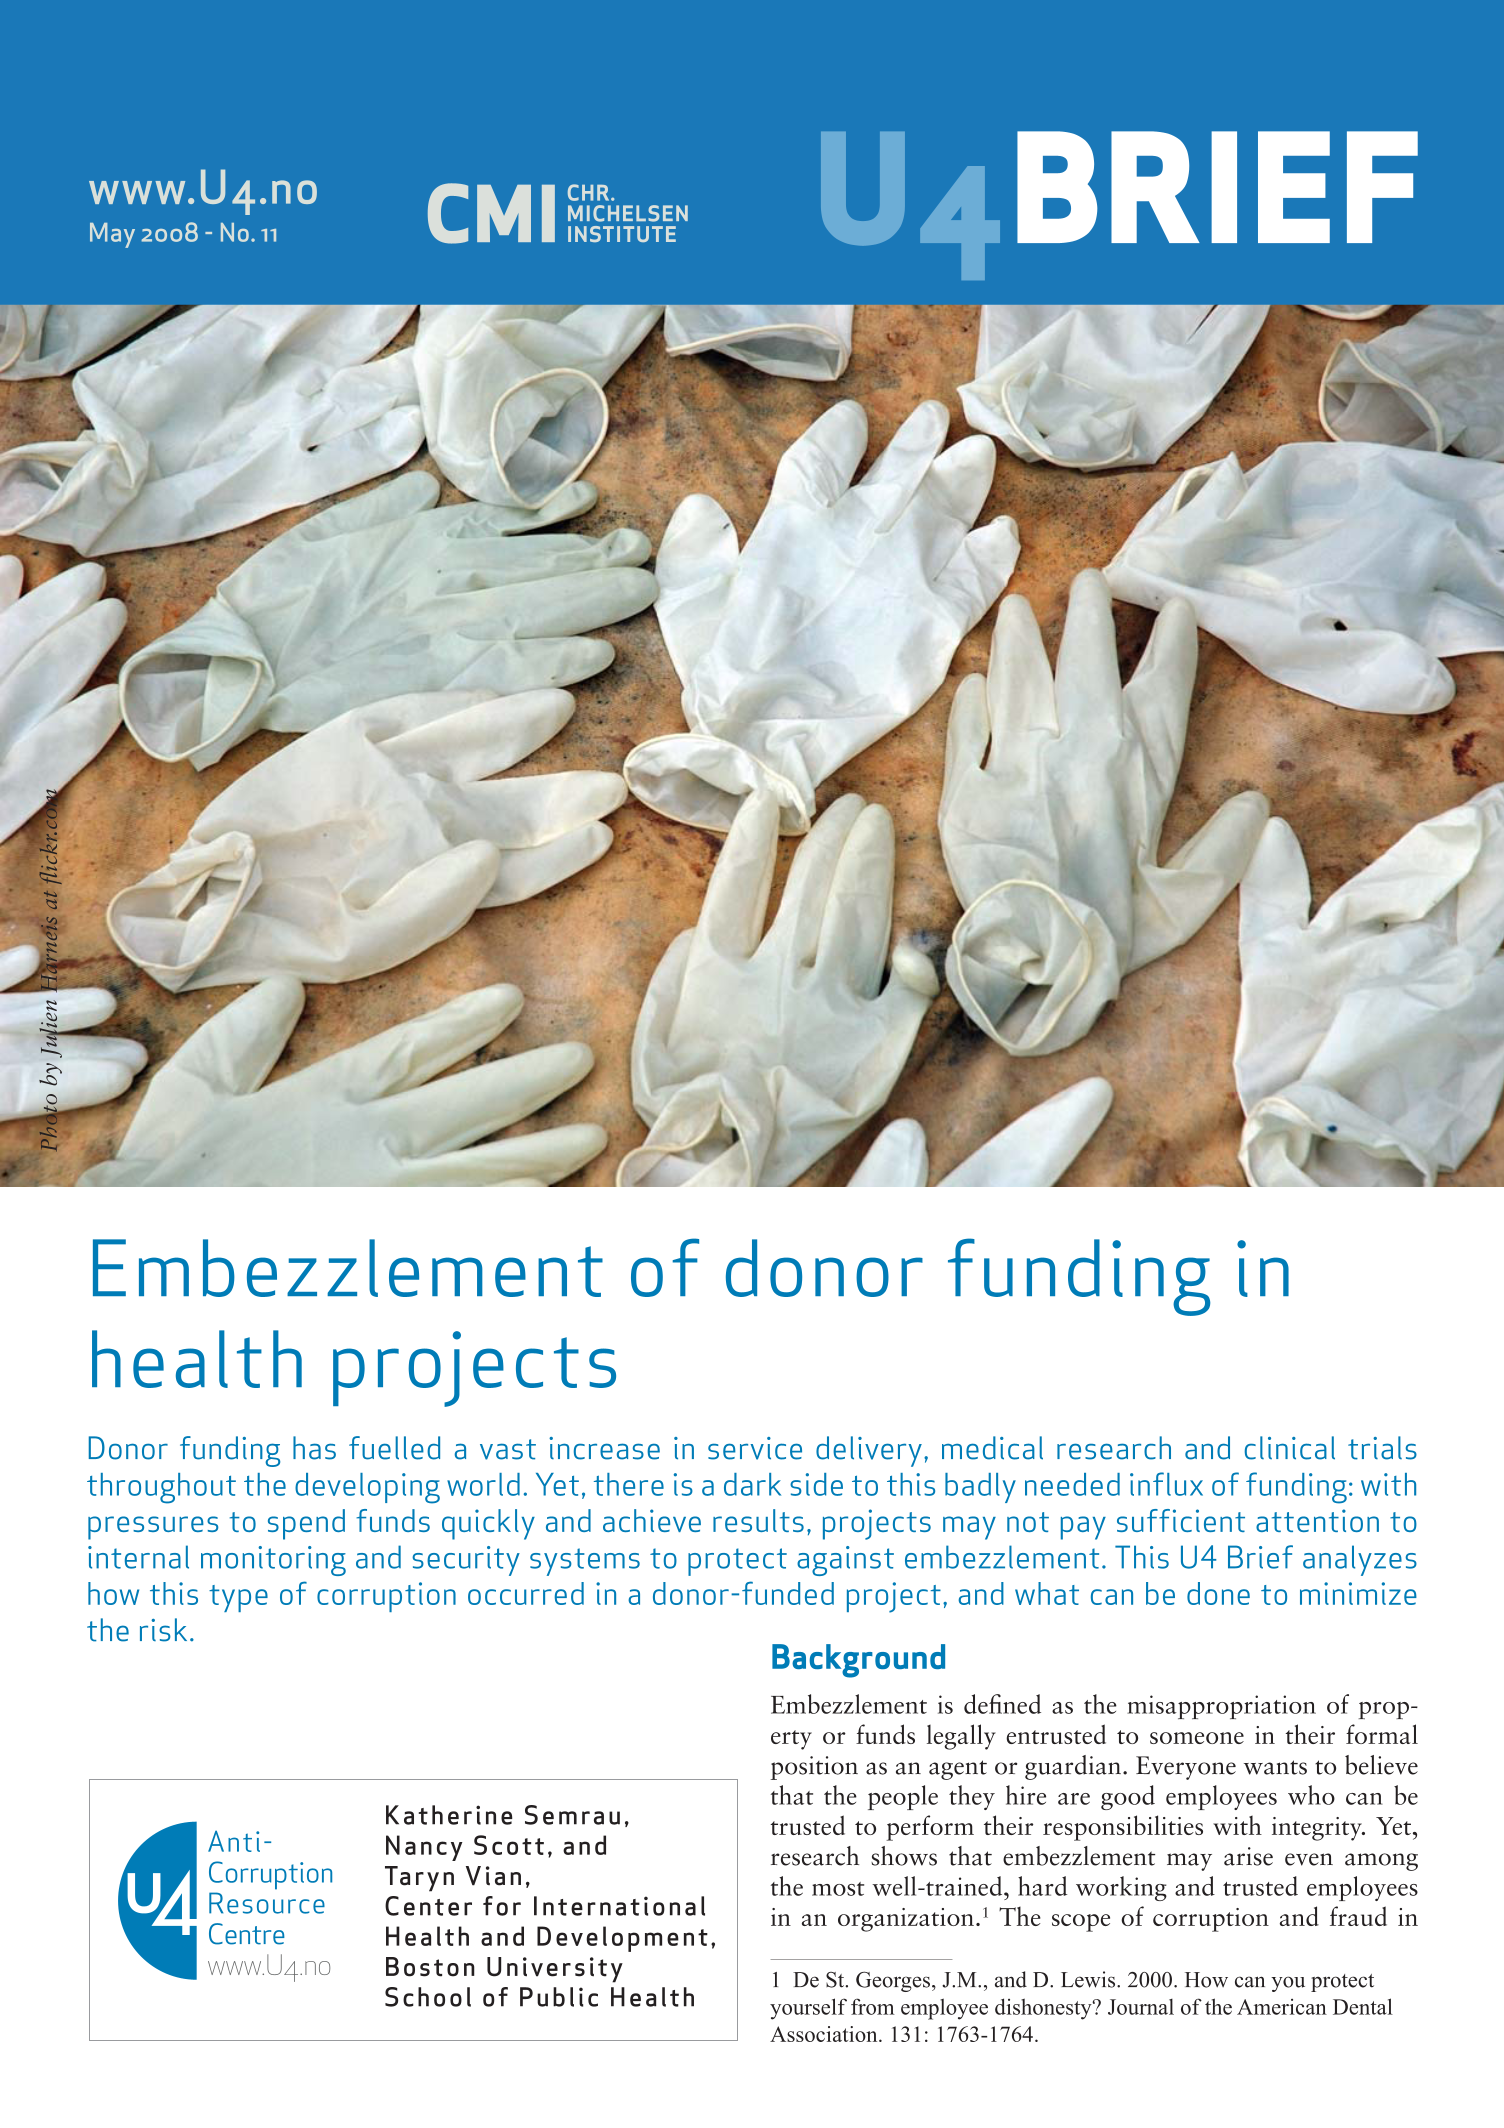 Embezzlement of Donor Funding in Health Projects